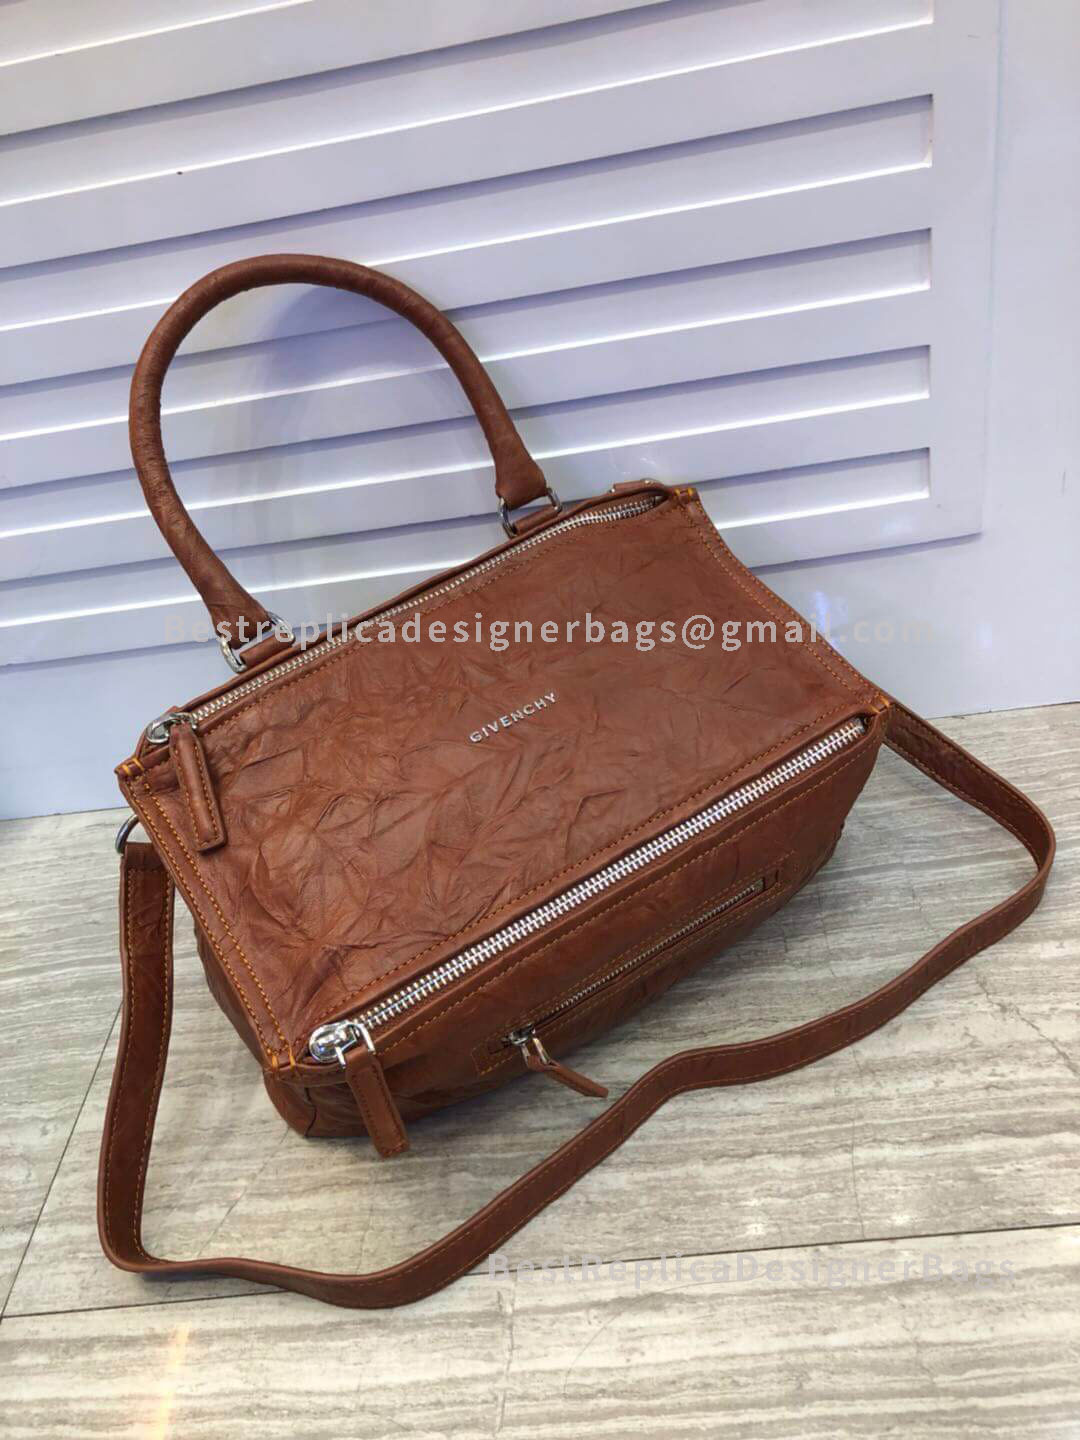 Givenchy Small Pandora Bag In Aged Leather Caramel SHW 1-28608